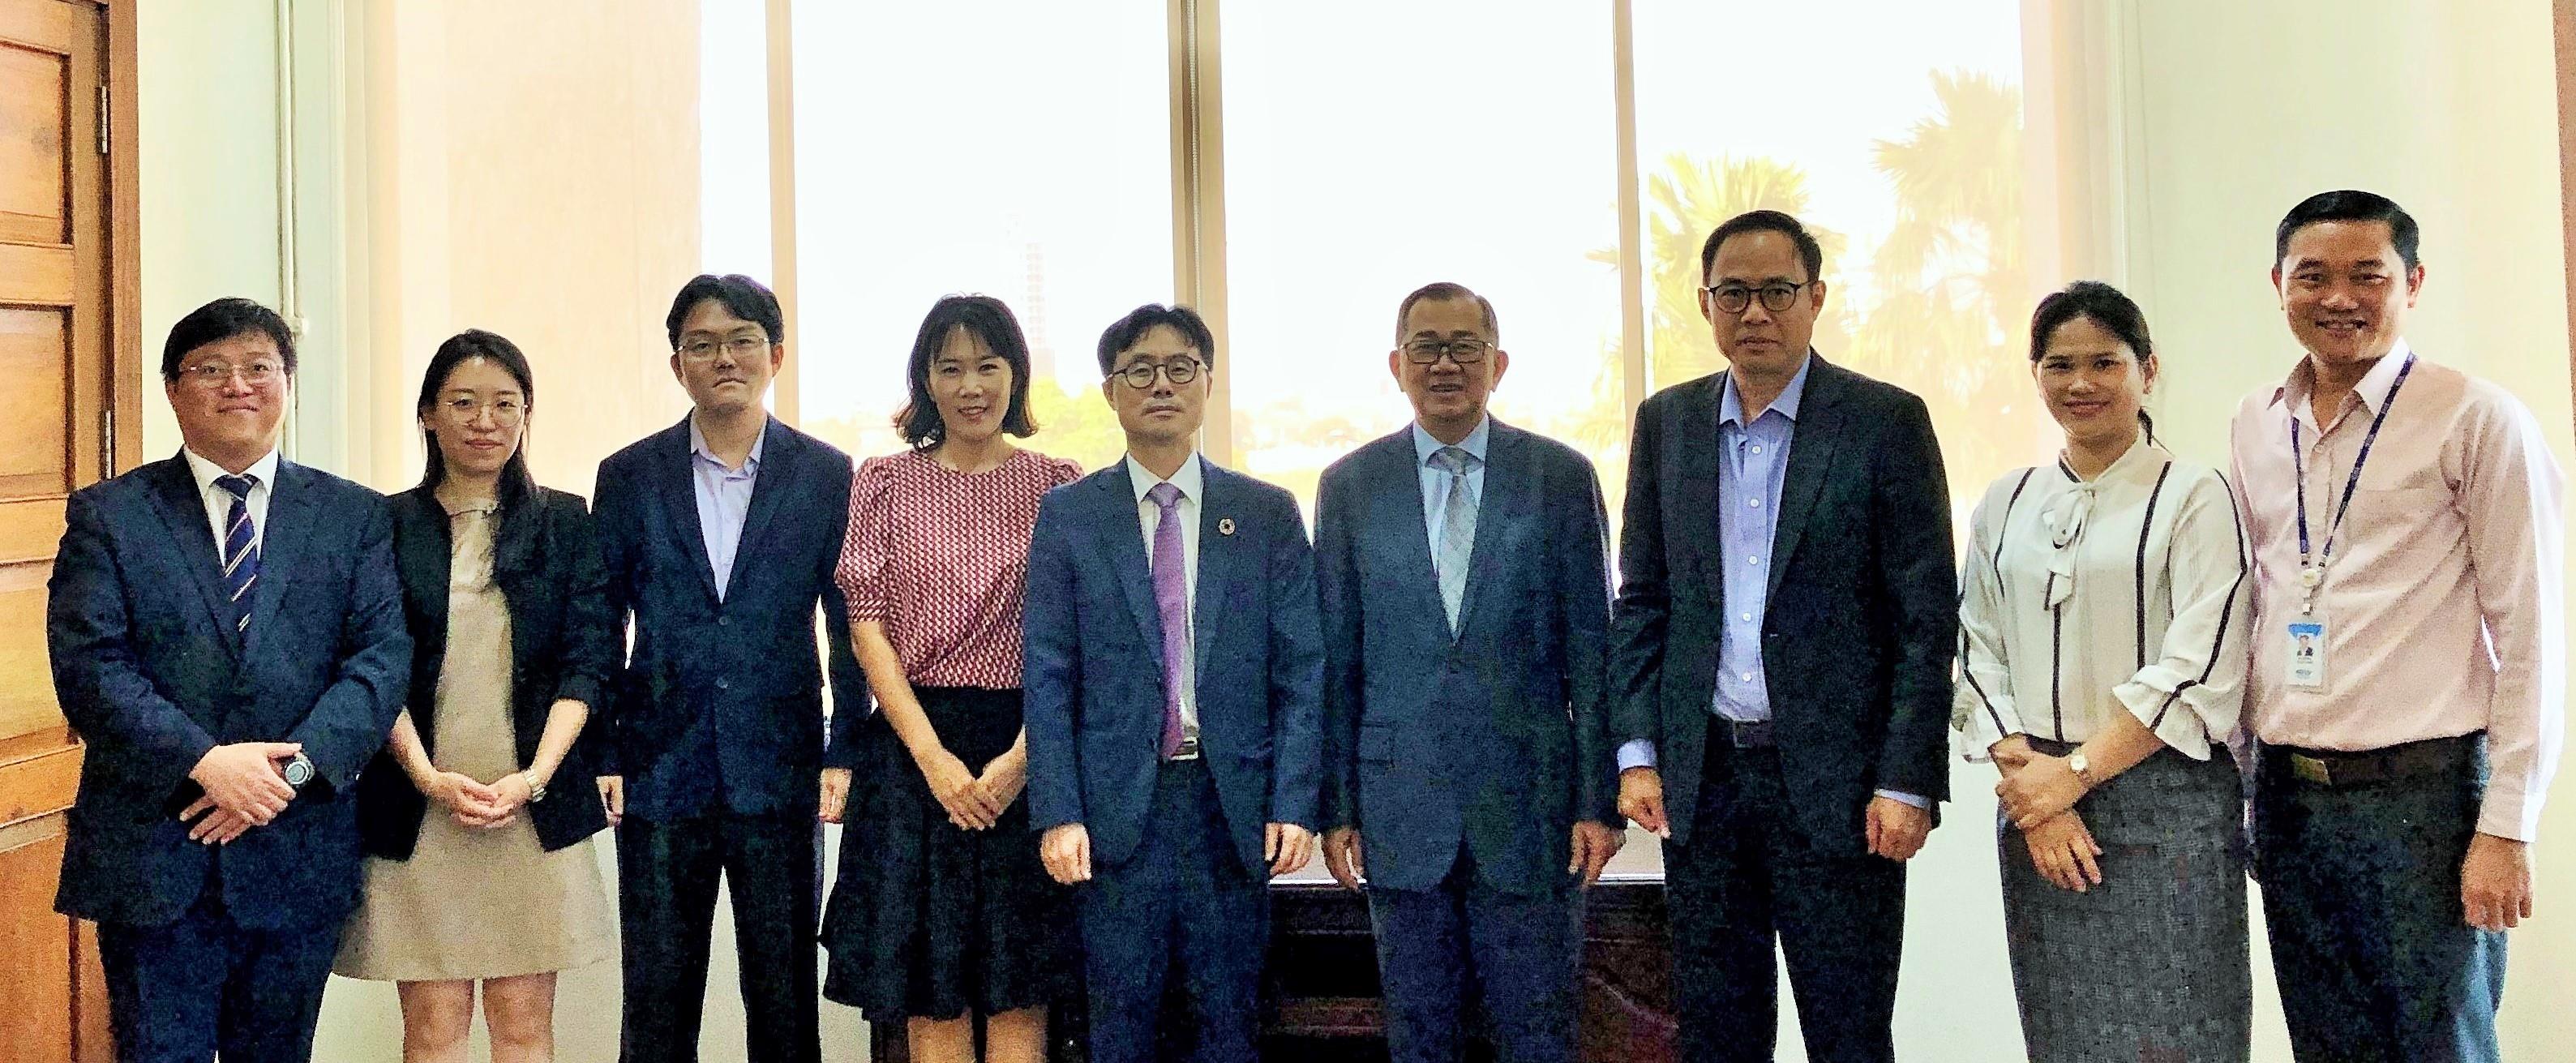 The meeting with Mr. Rho Hyun-Jun, Country Director of KOICA Cambodia